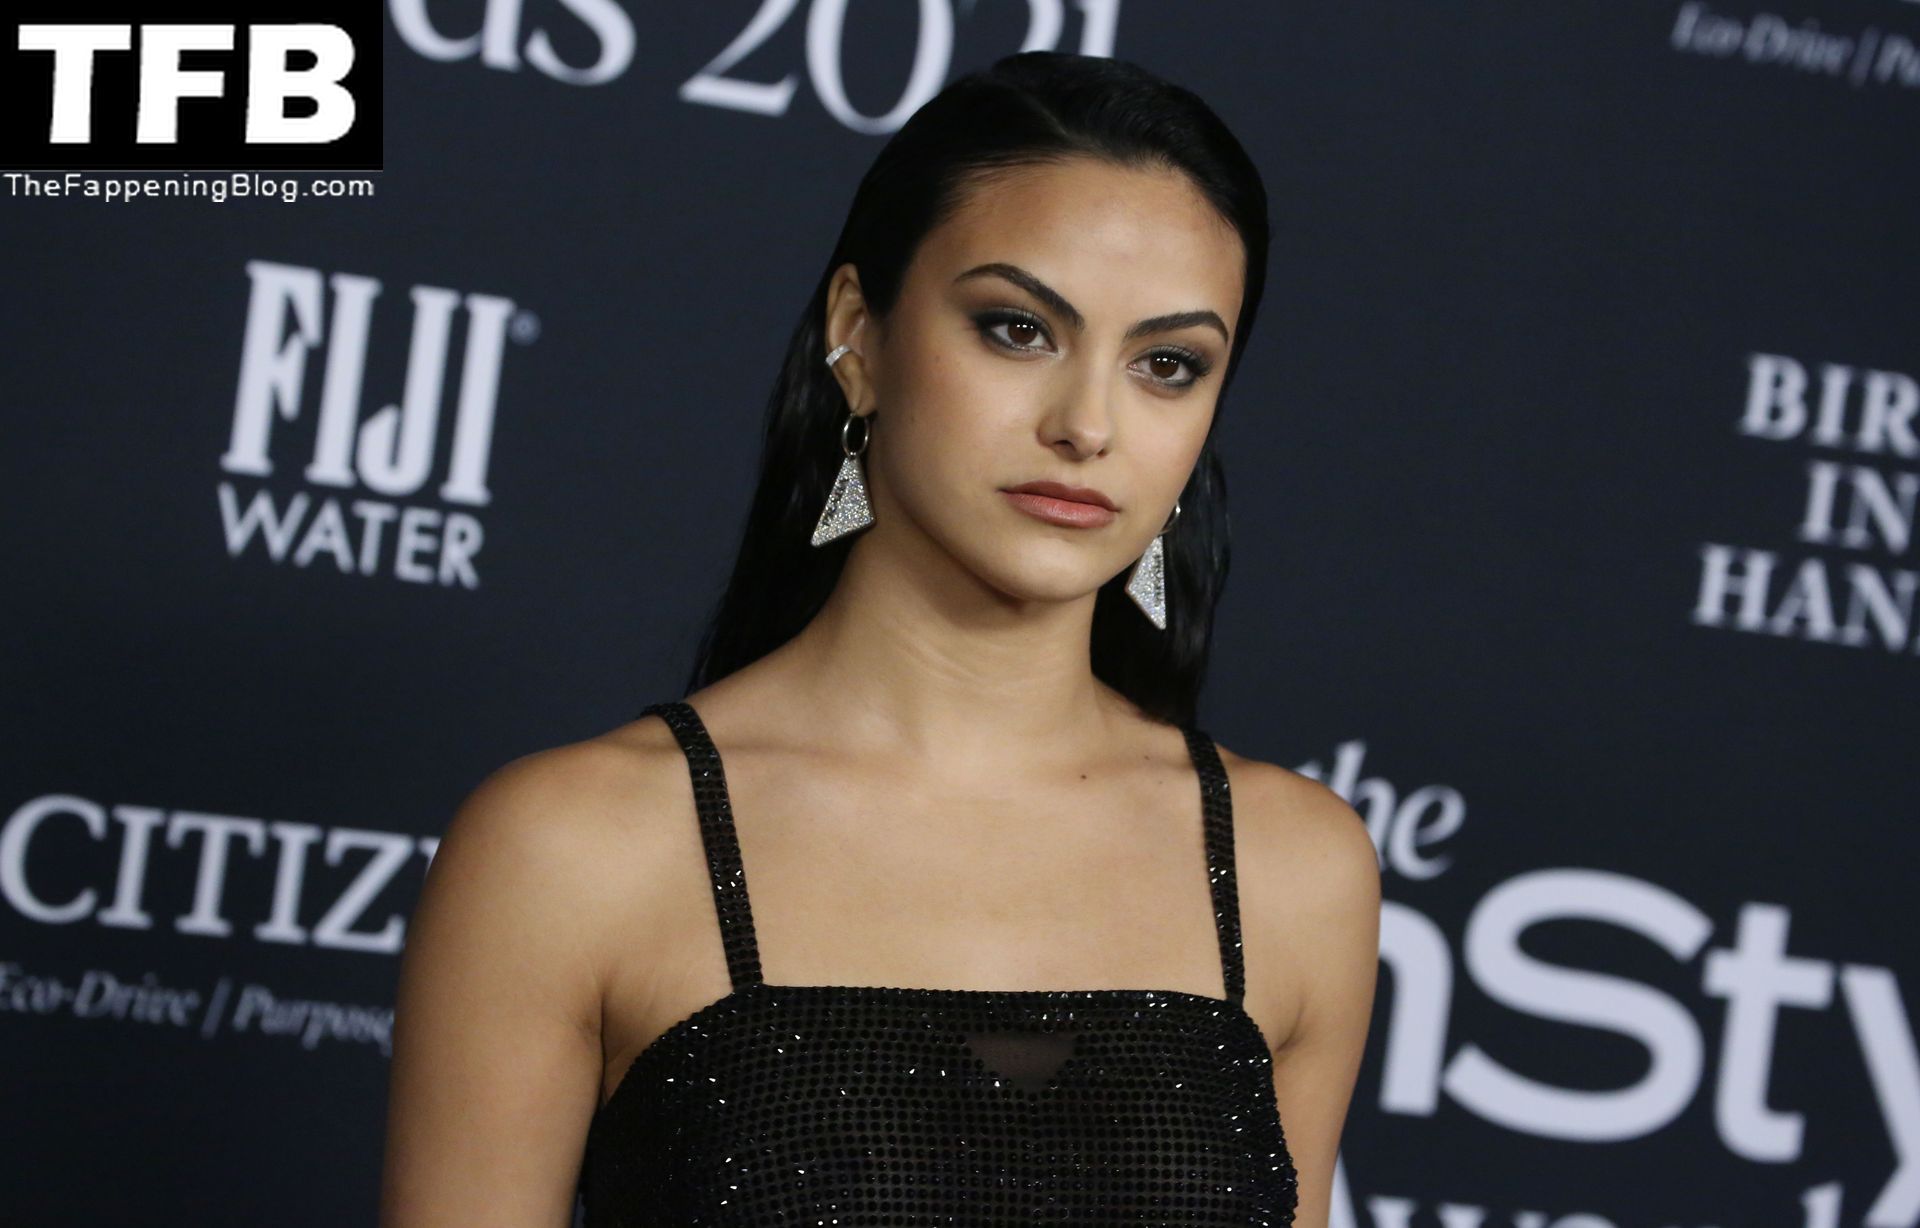 Camila-Mendes-See-Through-Tits-The-Fappening-Blog-91.jpg